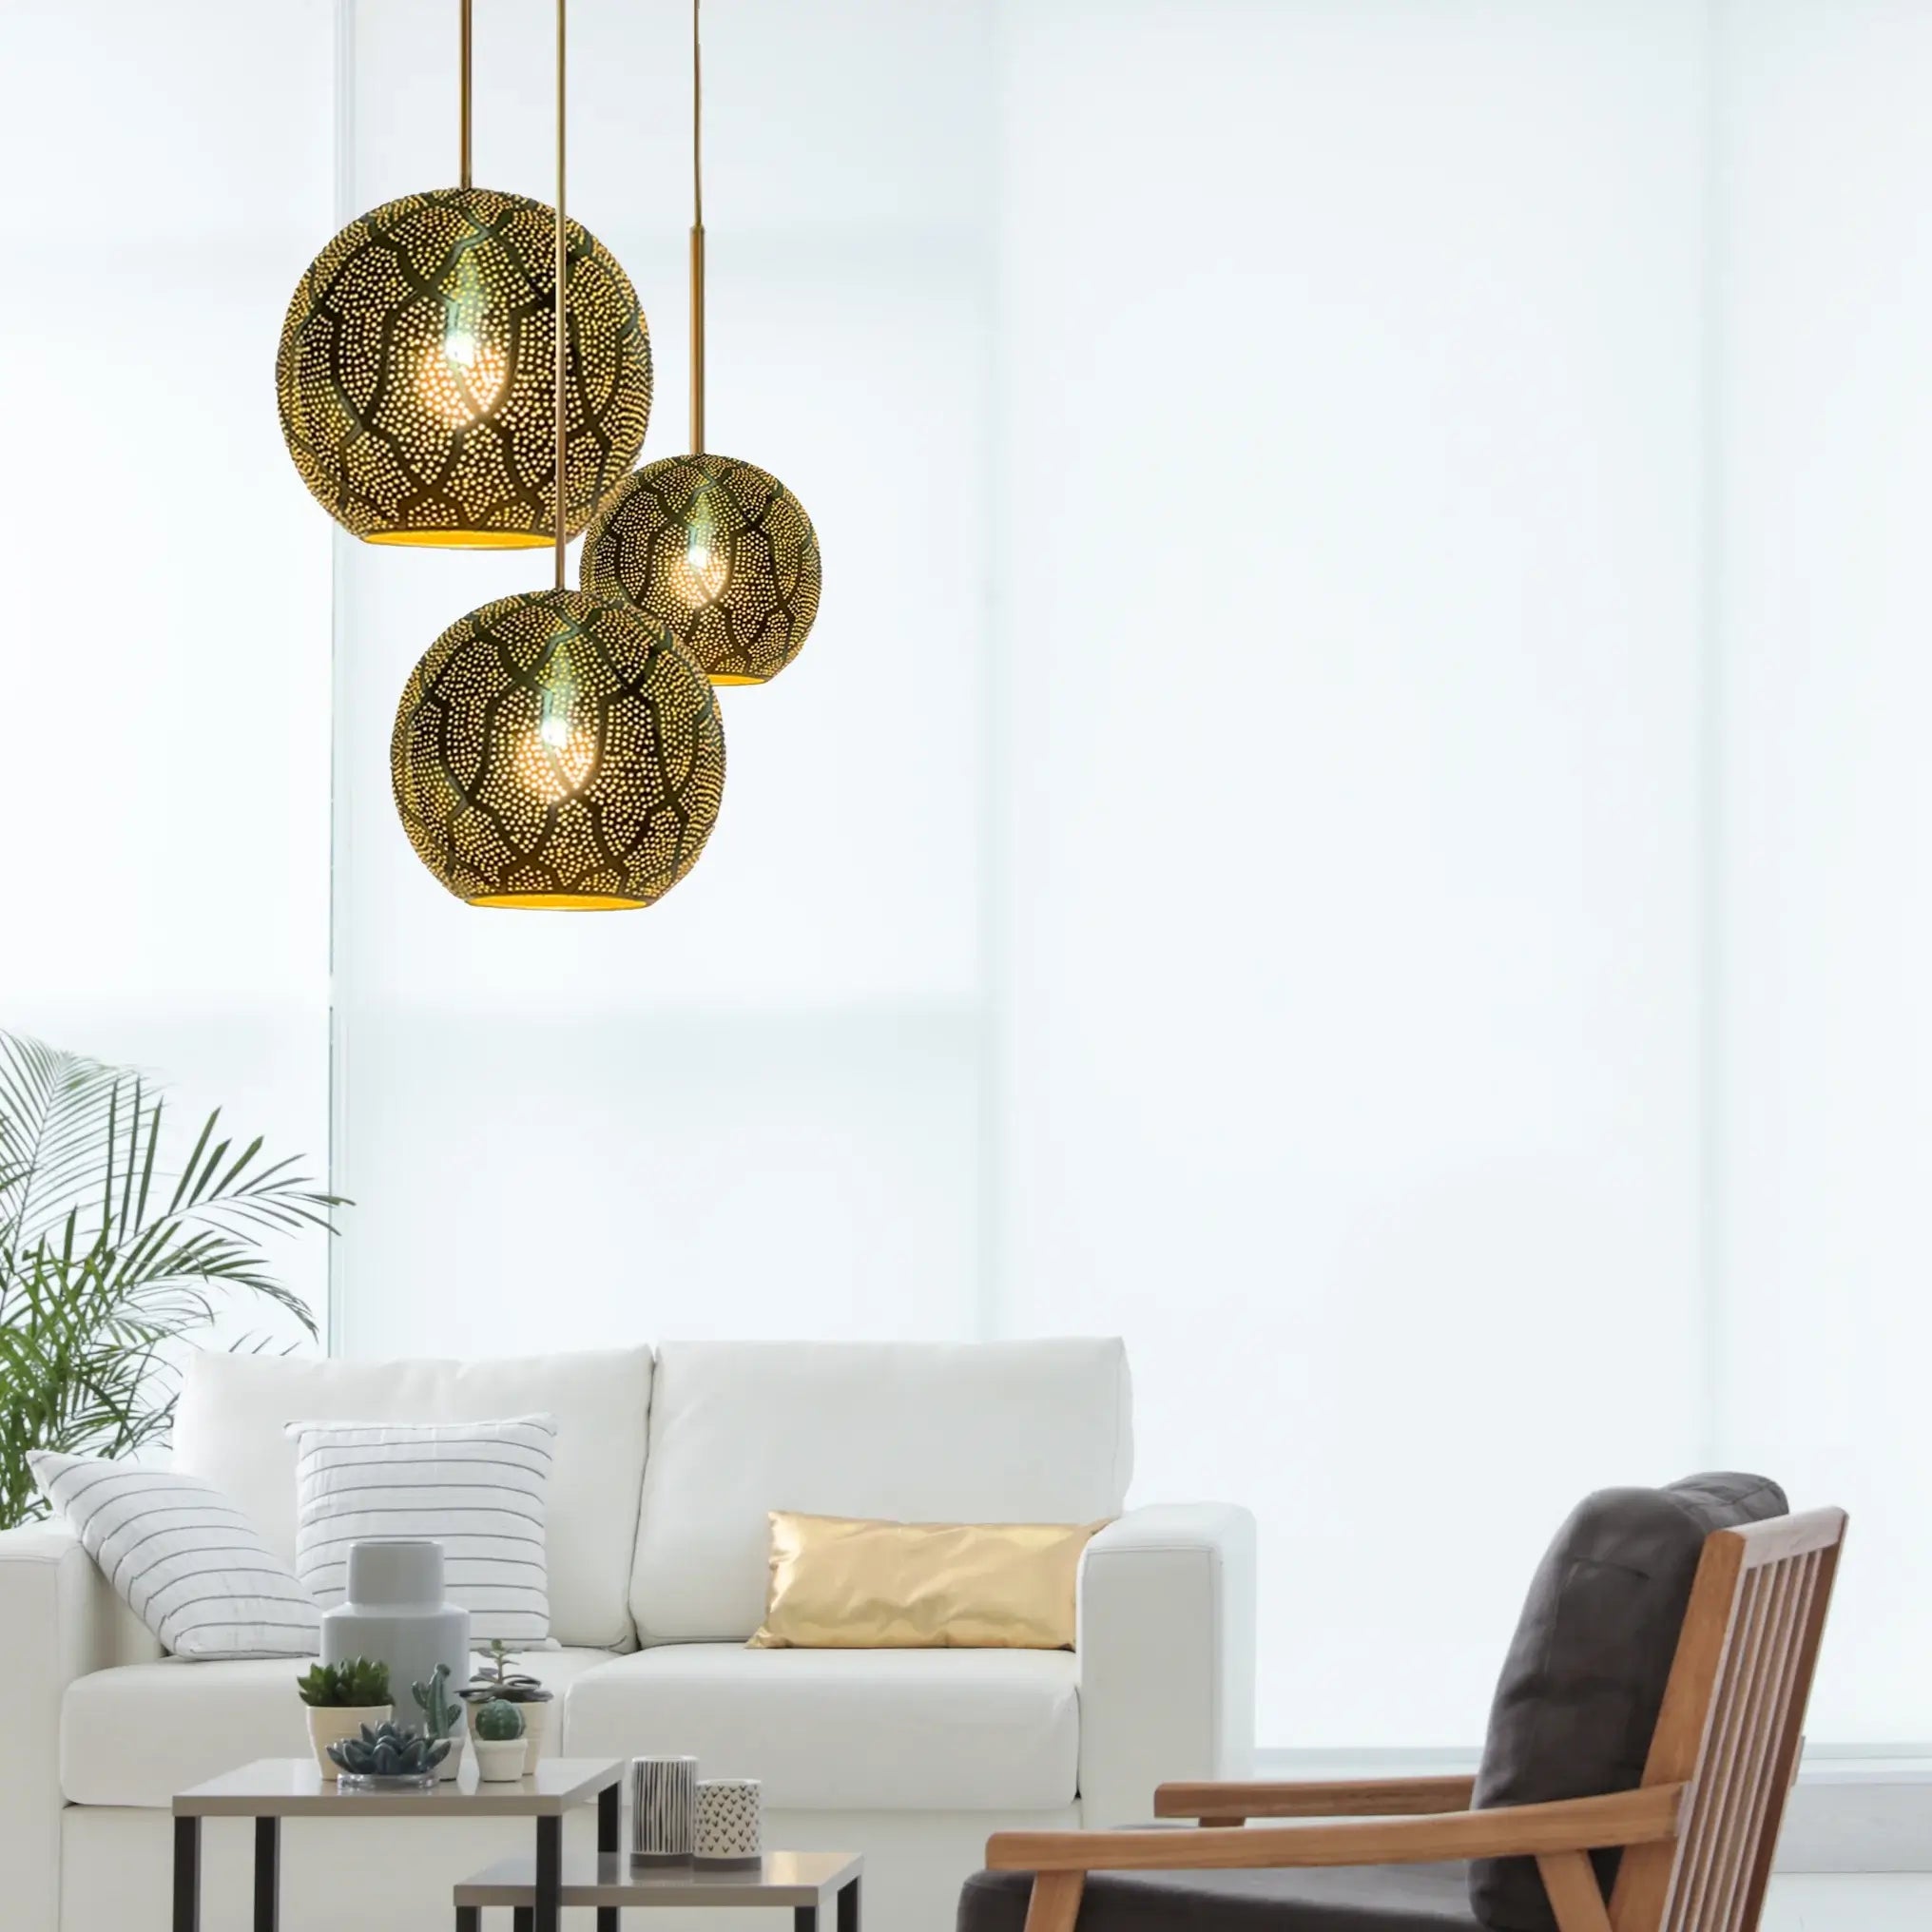 Dounia home Chandelier in polished brass made of Metal, Model: Ari